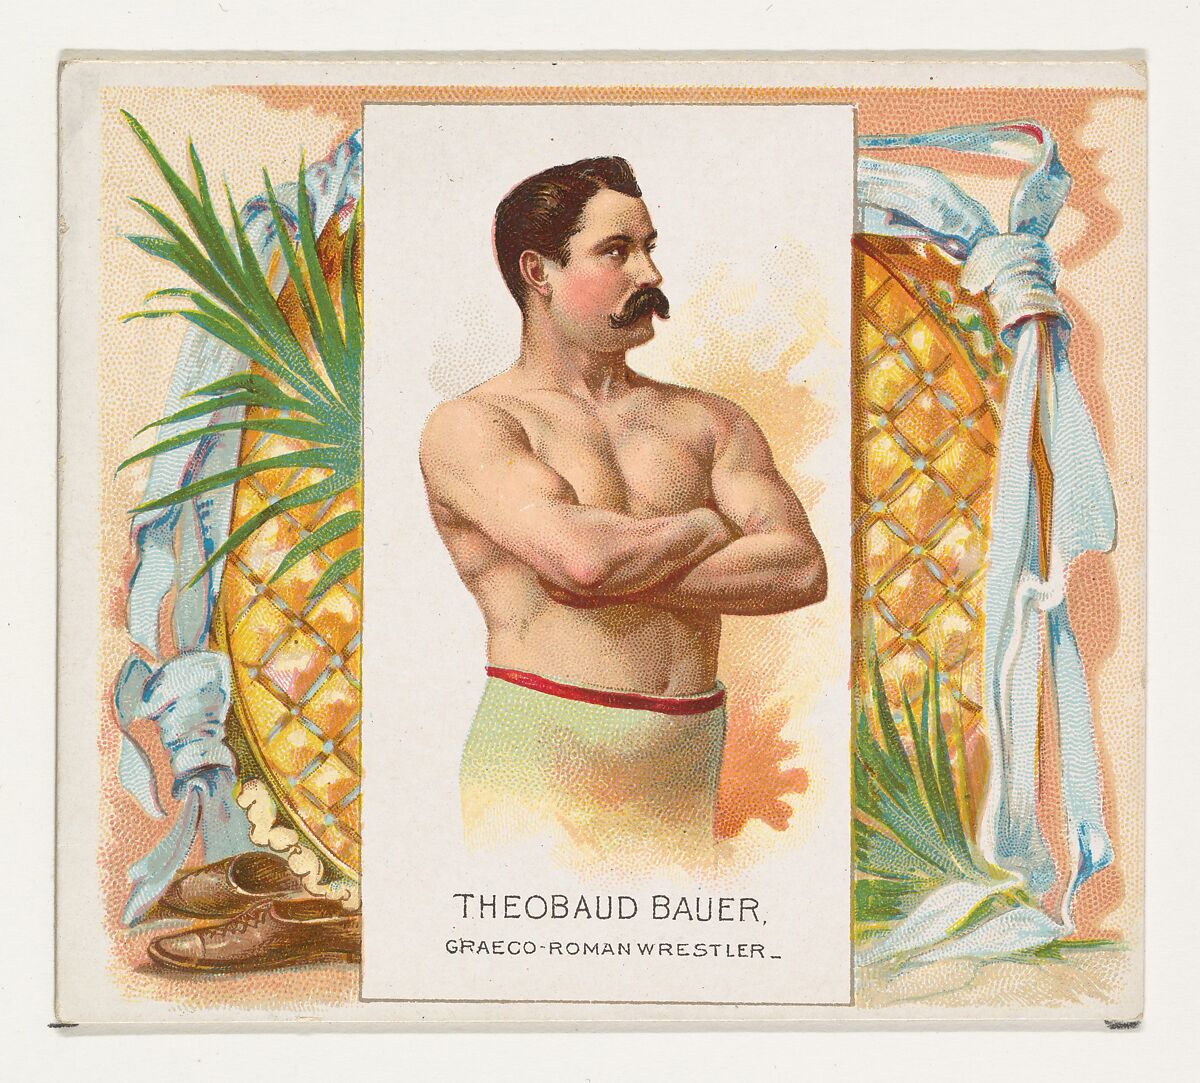 Theobaud Bauer, Graeco-Roman Wrestler, from World's Champions, Second Series (N43) for Allen & Ginter Cigarettes, Allen &amp; Ginter (American, Richmond, Virginia), Commercial lithograph 